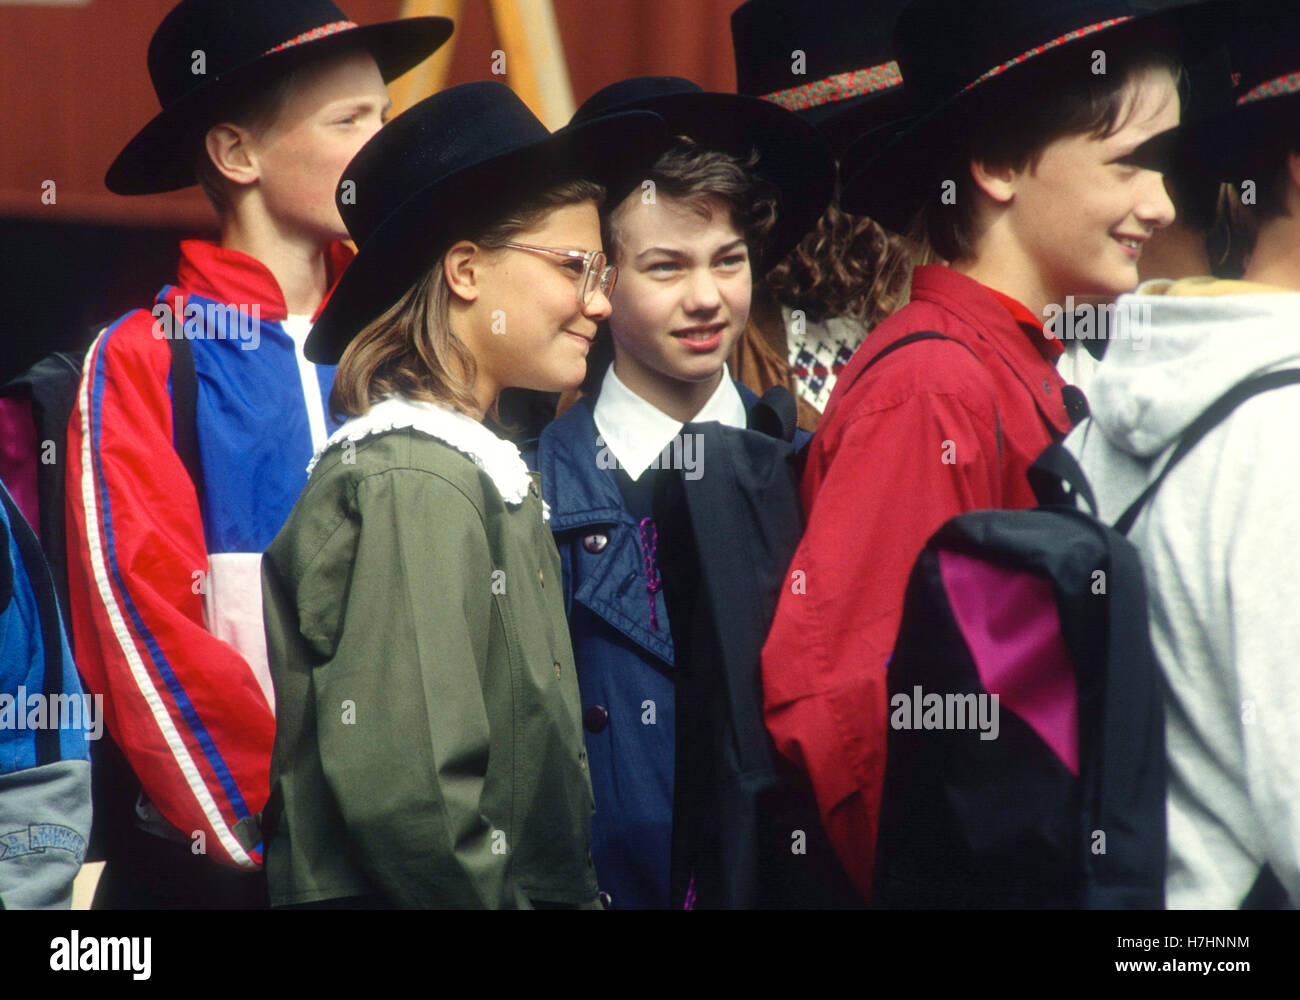 crown-princess-victoria-with-school-friends-are-planting-trees-at-H7HNNM.jpg